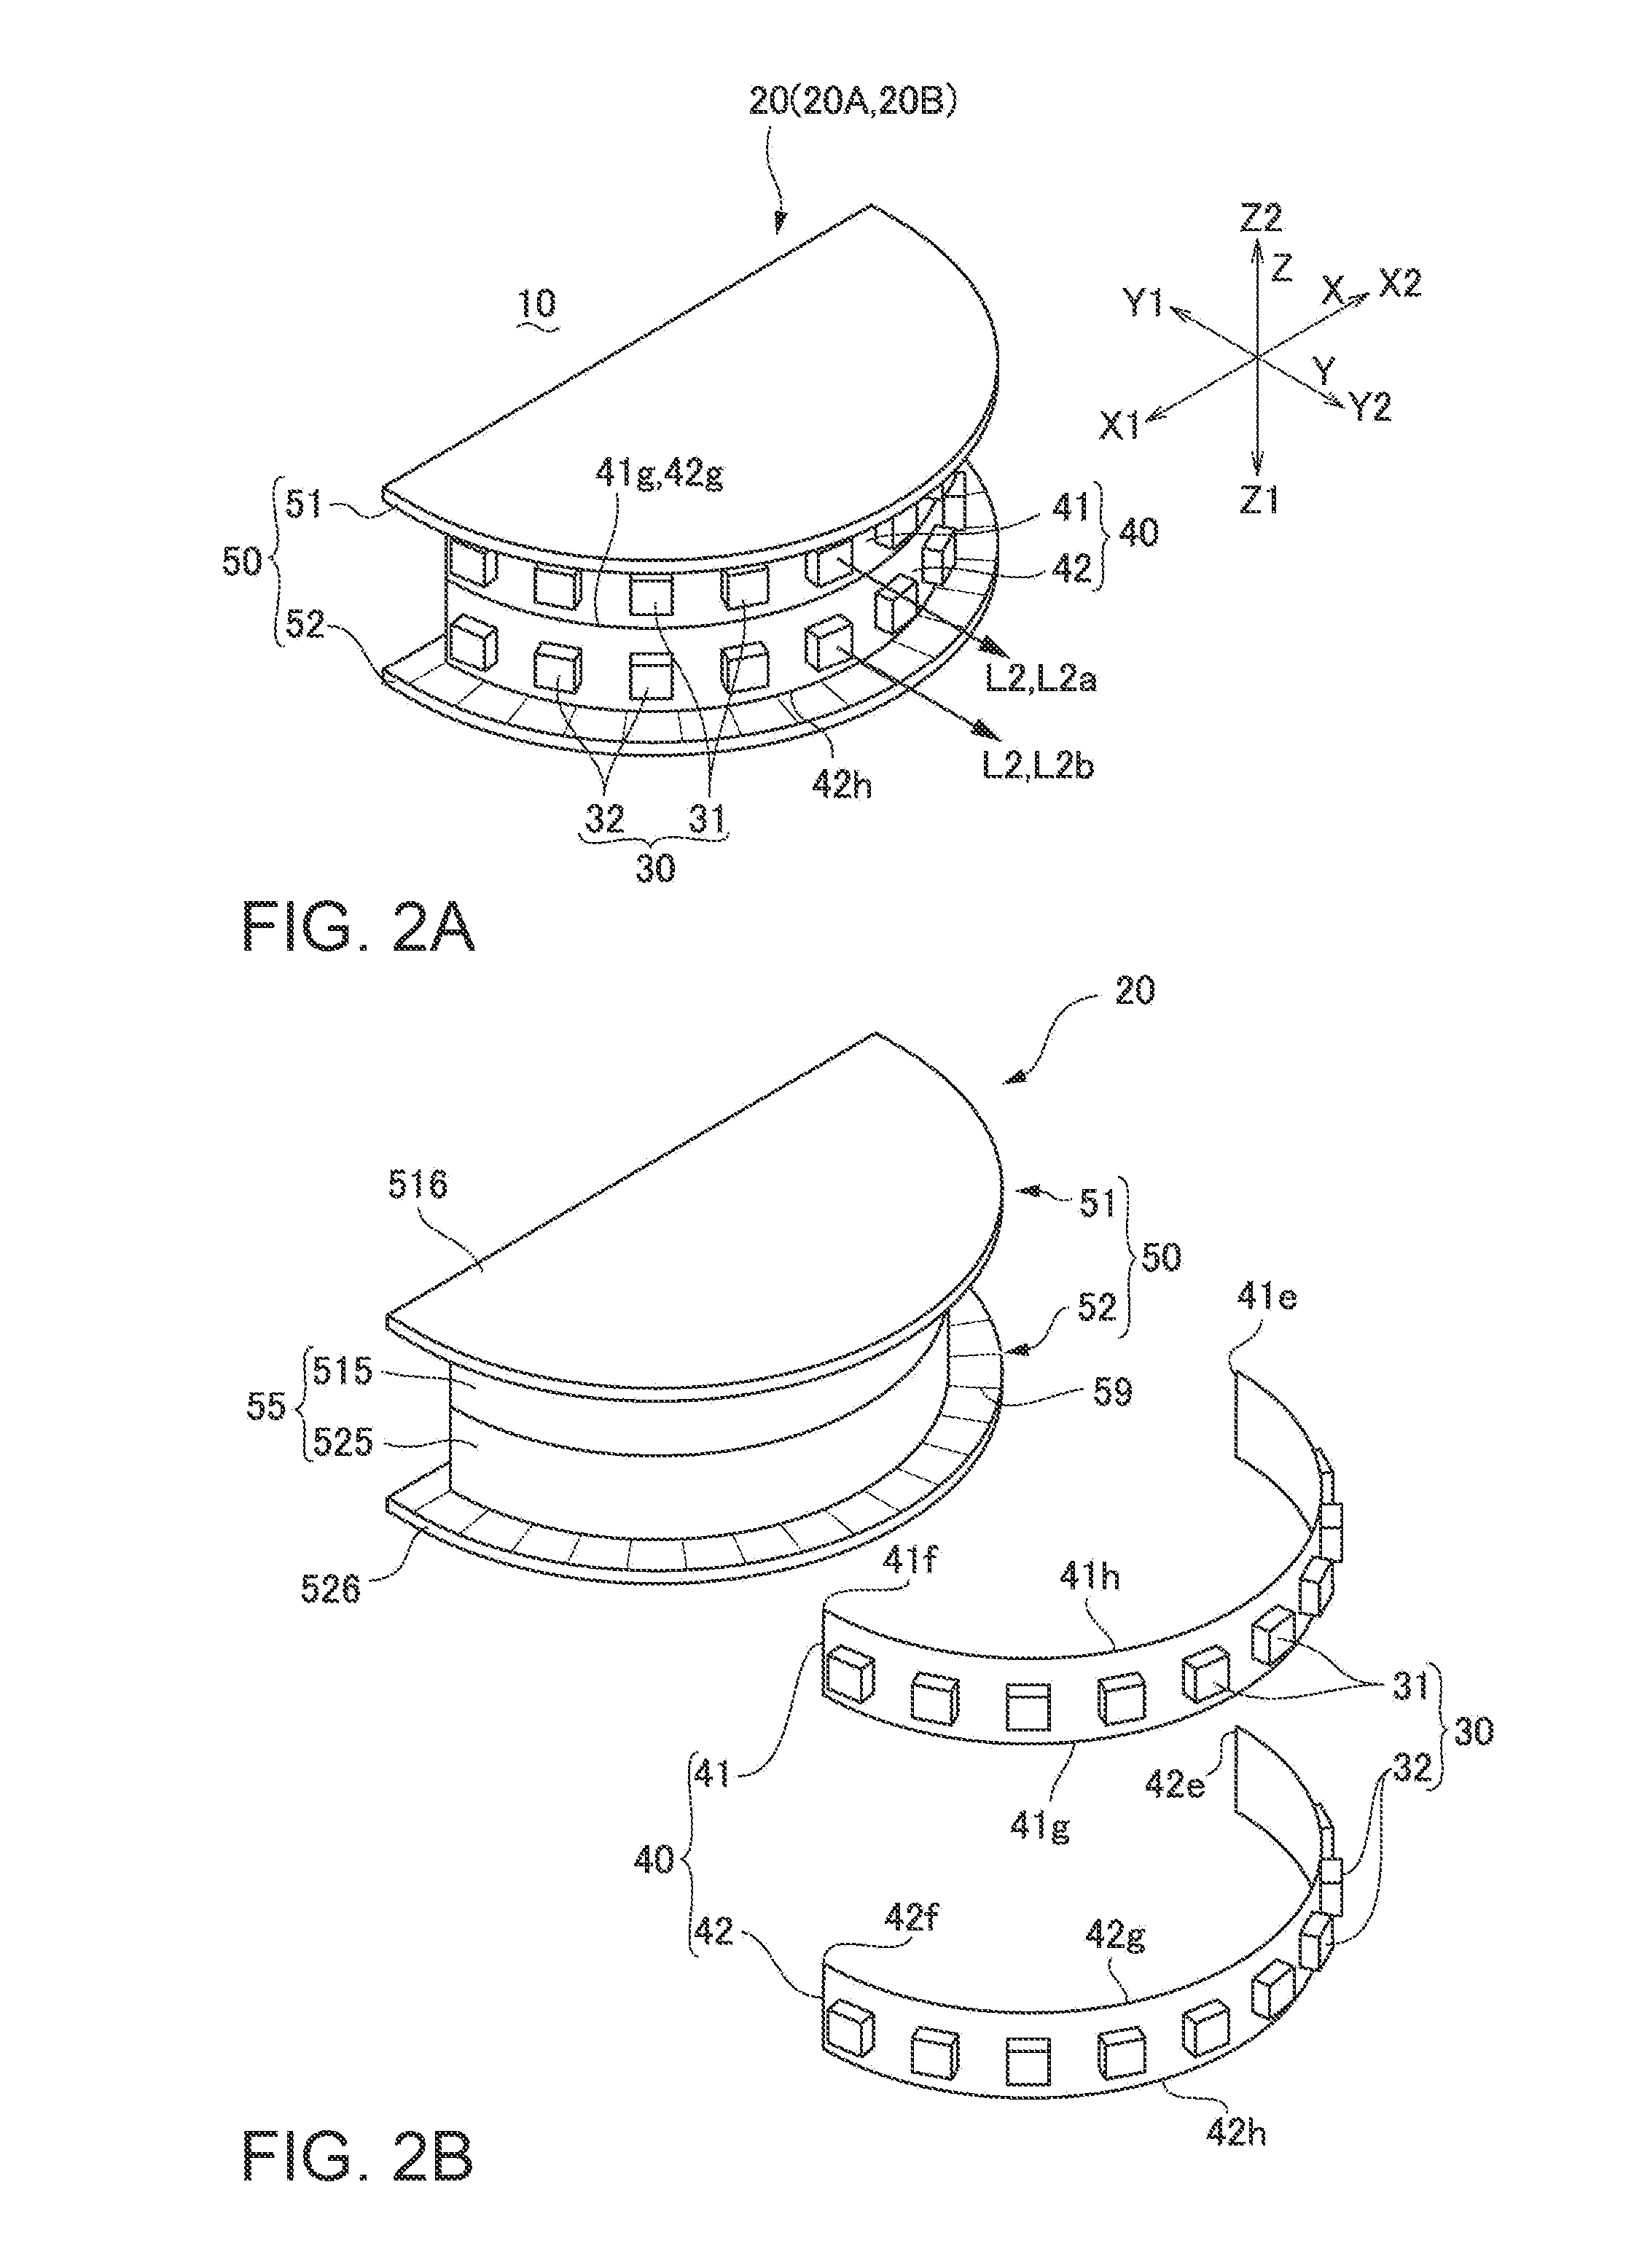 Optical position detecting device and apparatus provided with position detecting function